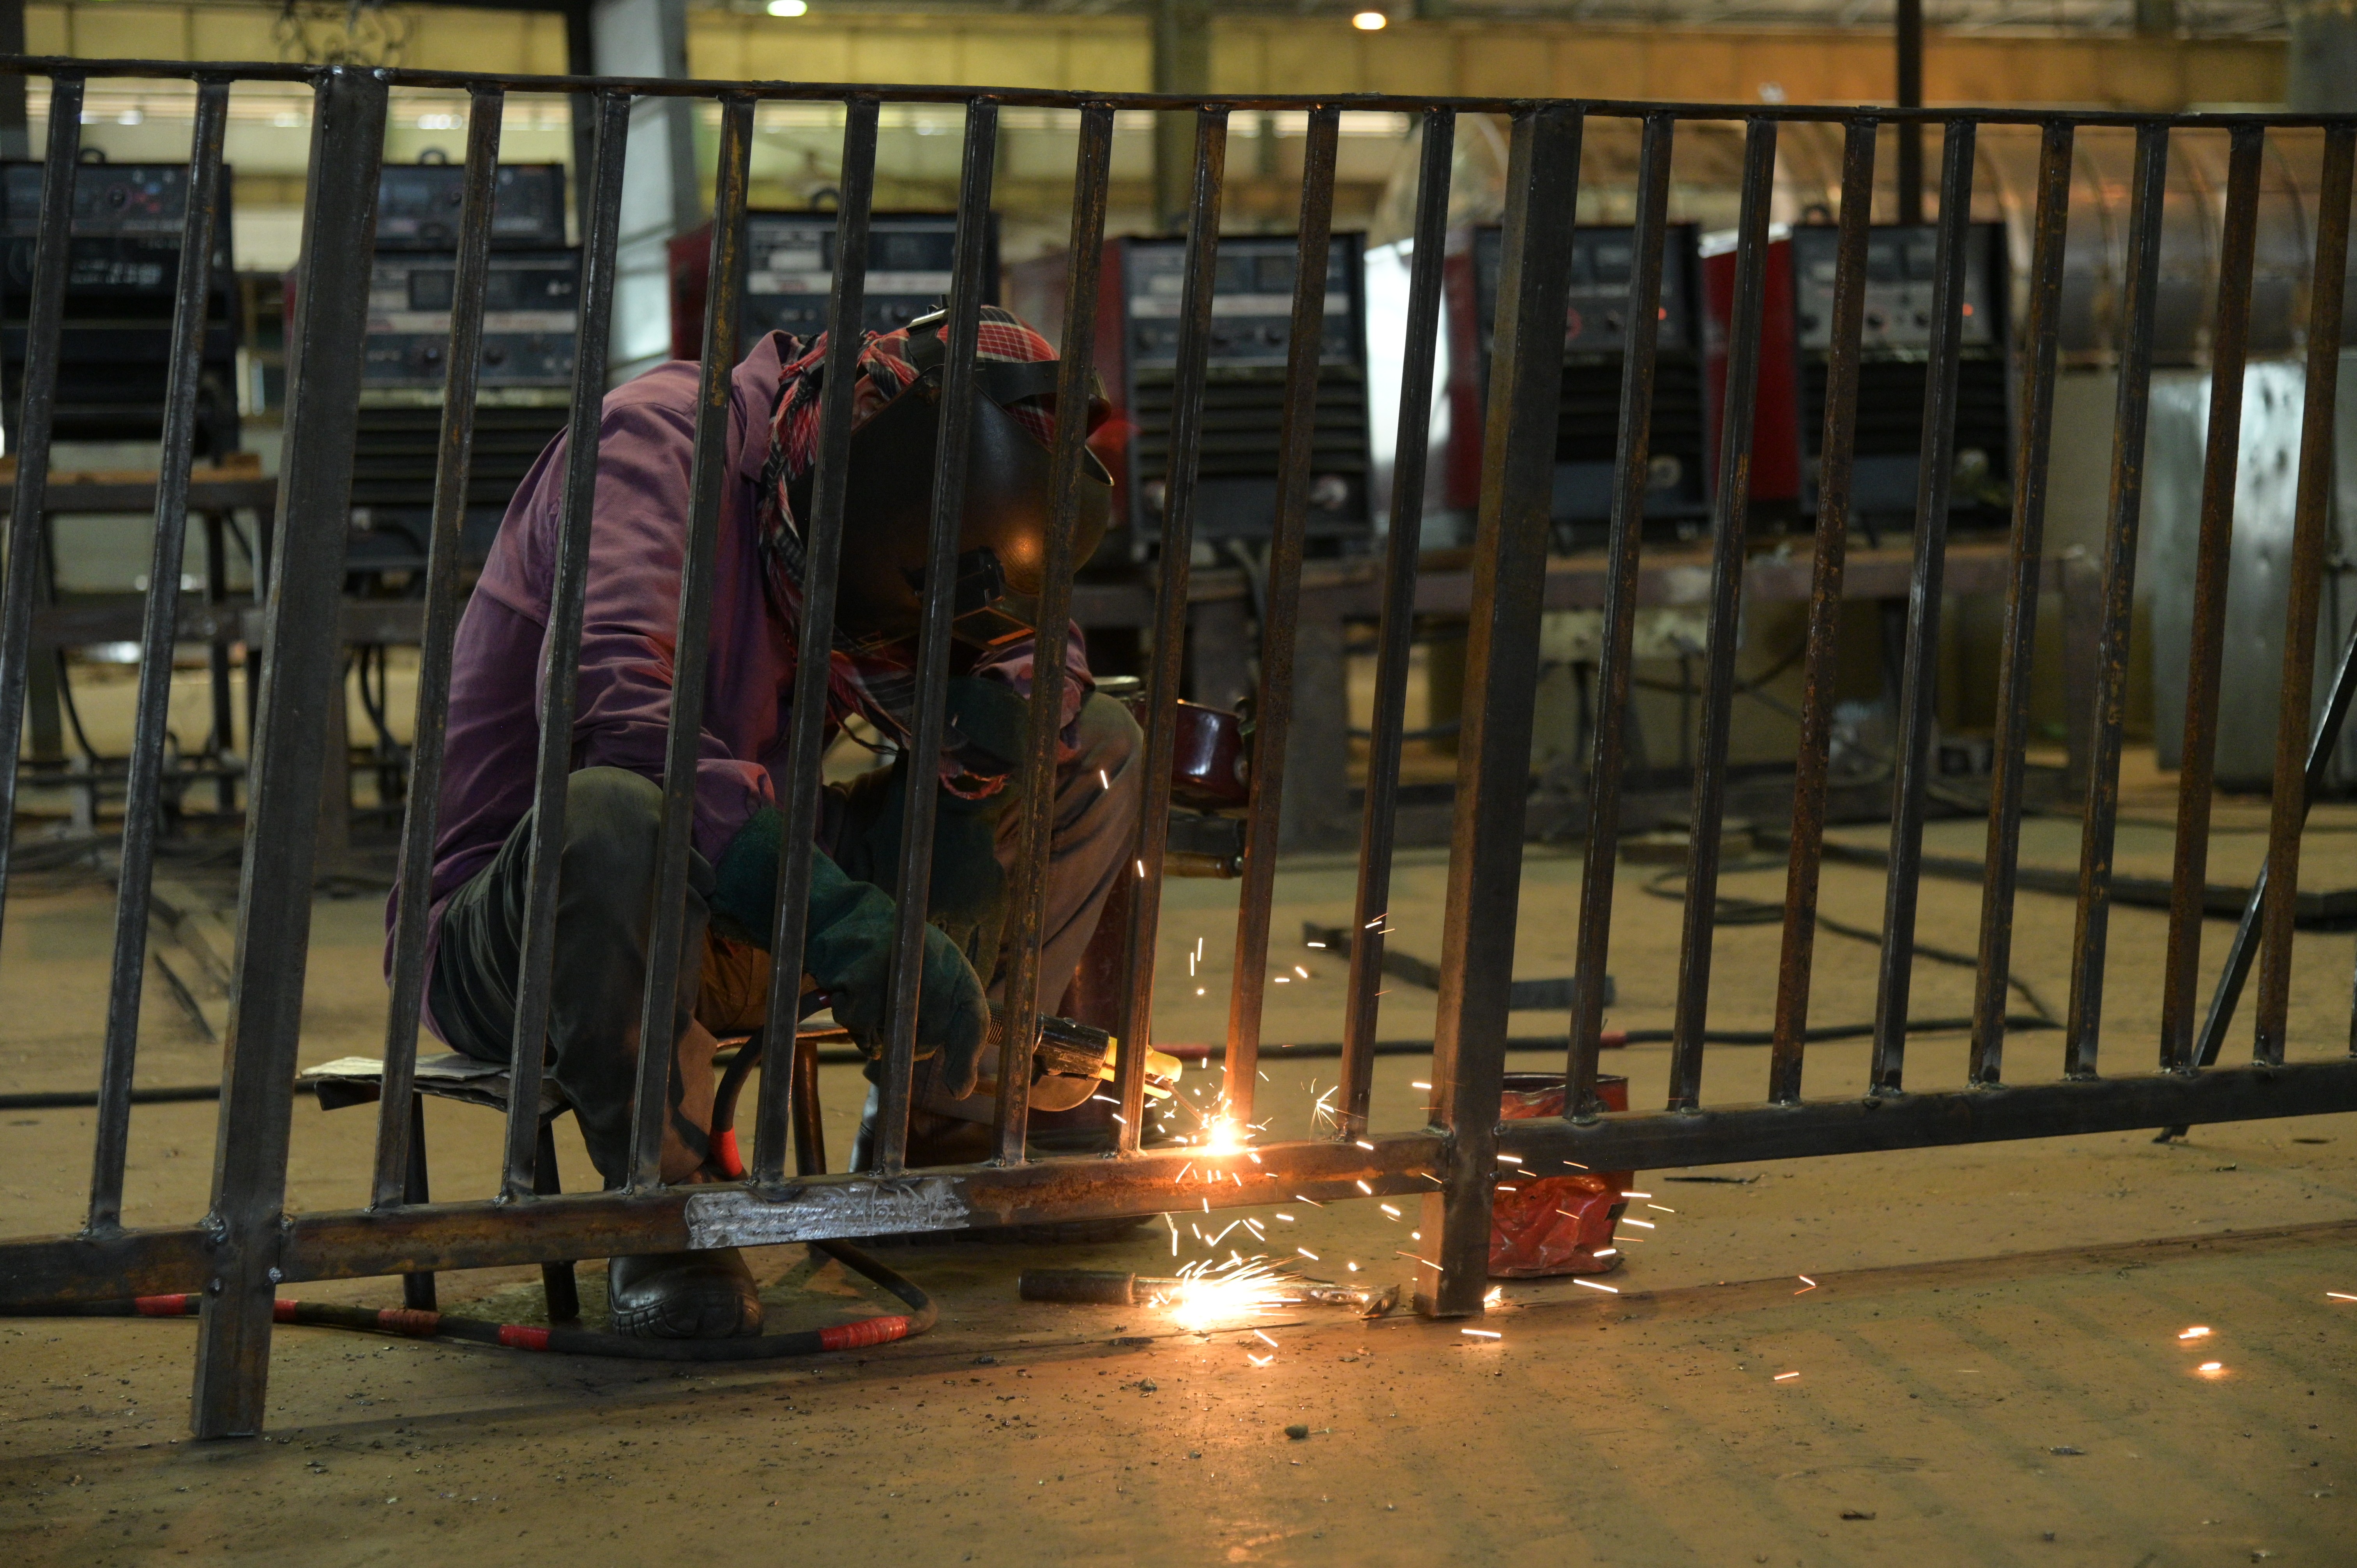 A worker welding the iron bars